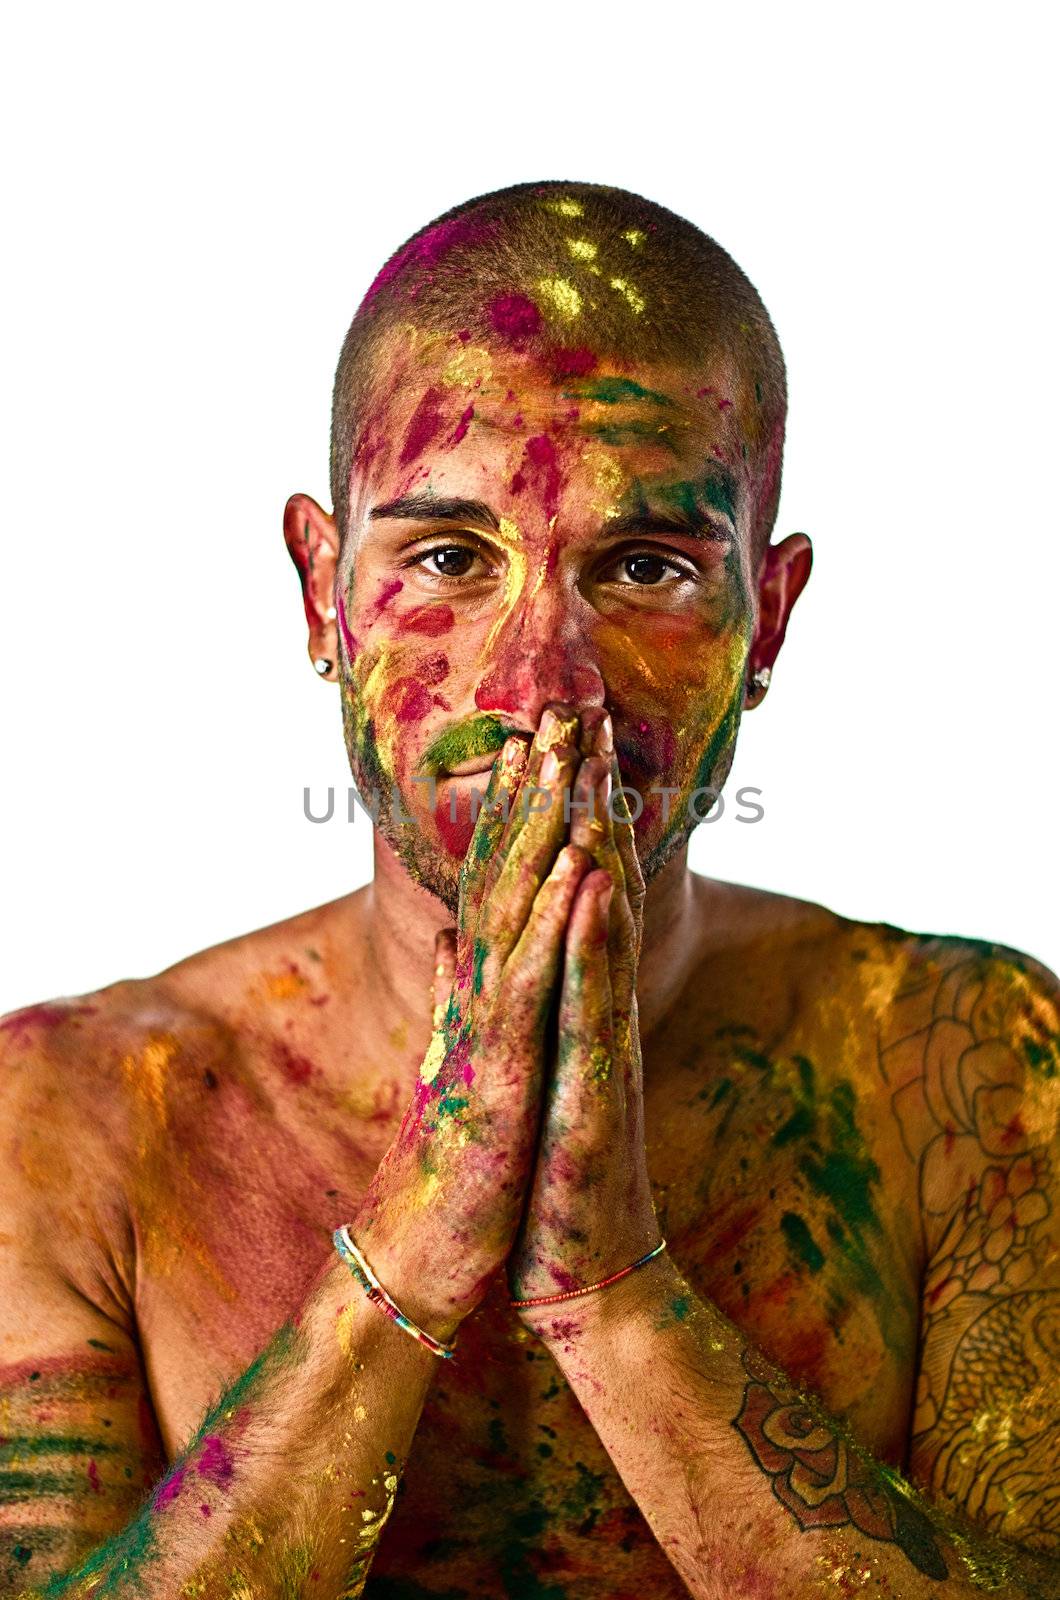 Attractive young man shirtless, skin painted all over with bright colors and hands in front of his mouth, grinning